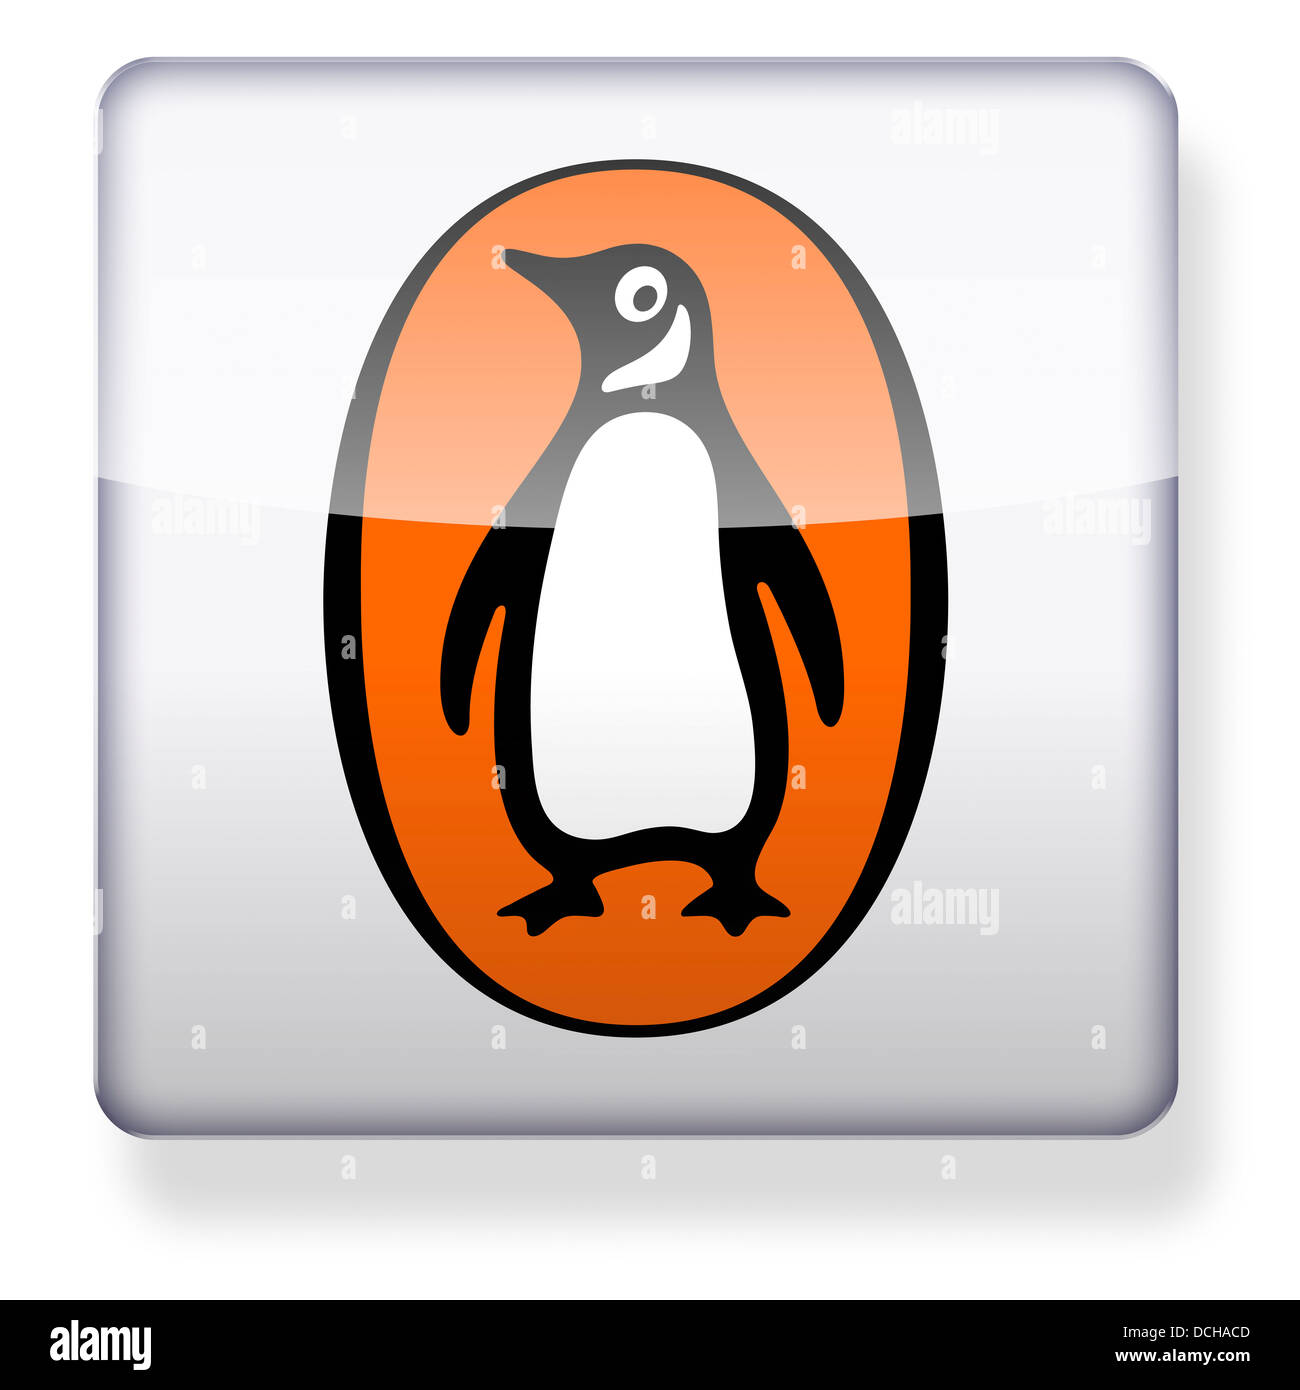 Penguin books logo as an app icon. Clipping path included. Stock Photo